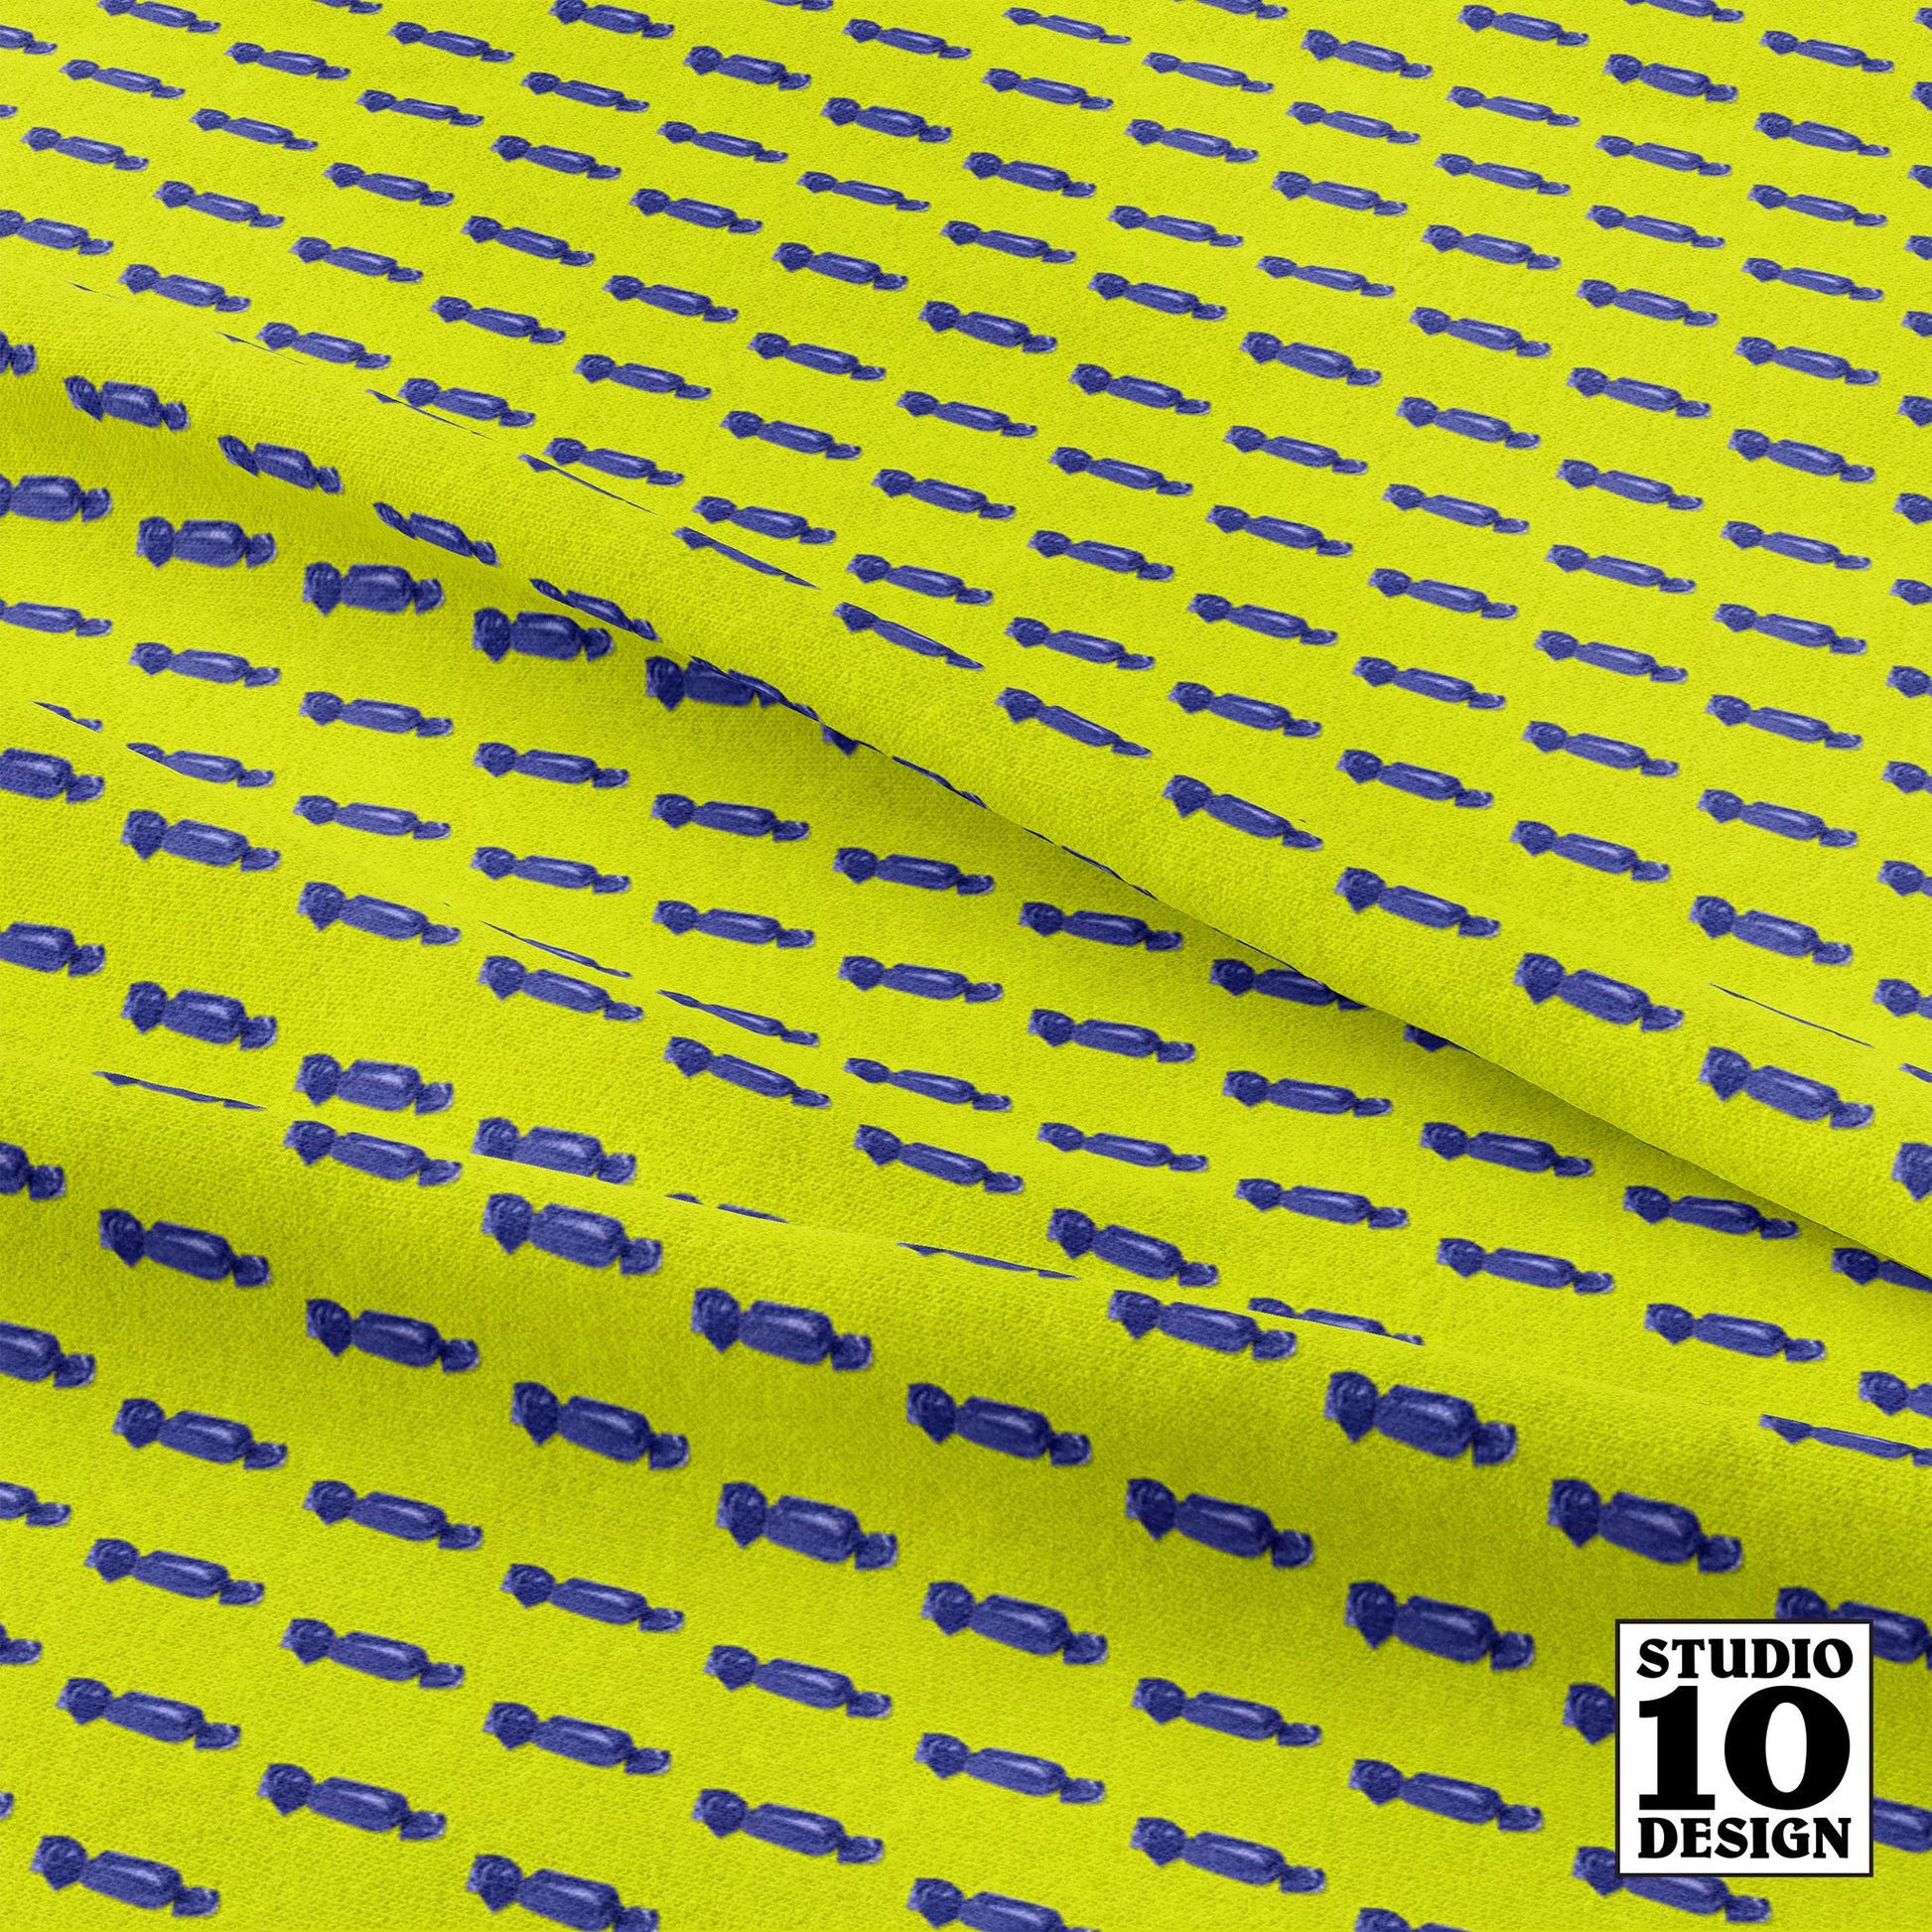 Hard Candy Purple on Chartreuse Printed Fabric by Studio Ten Design